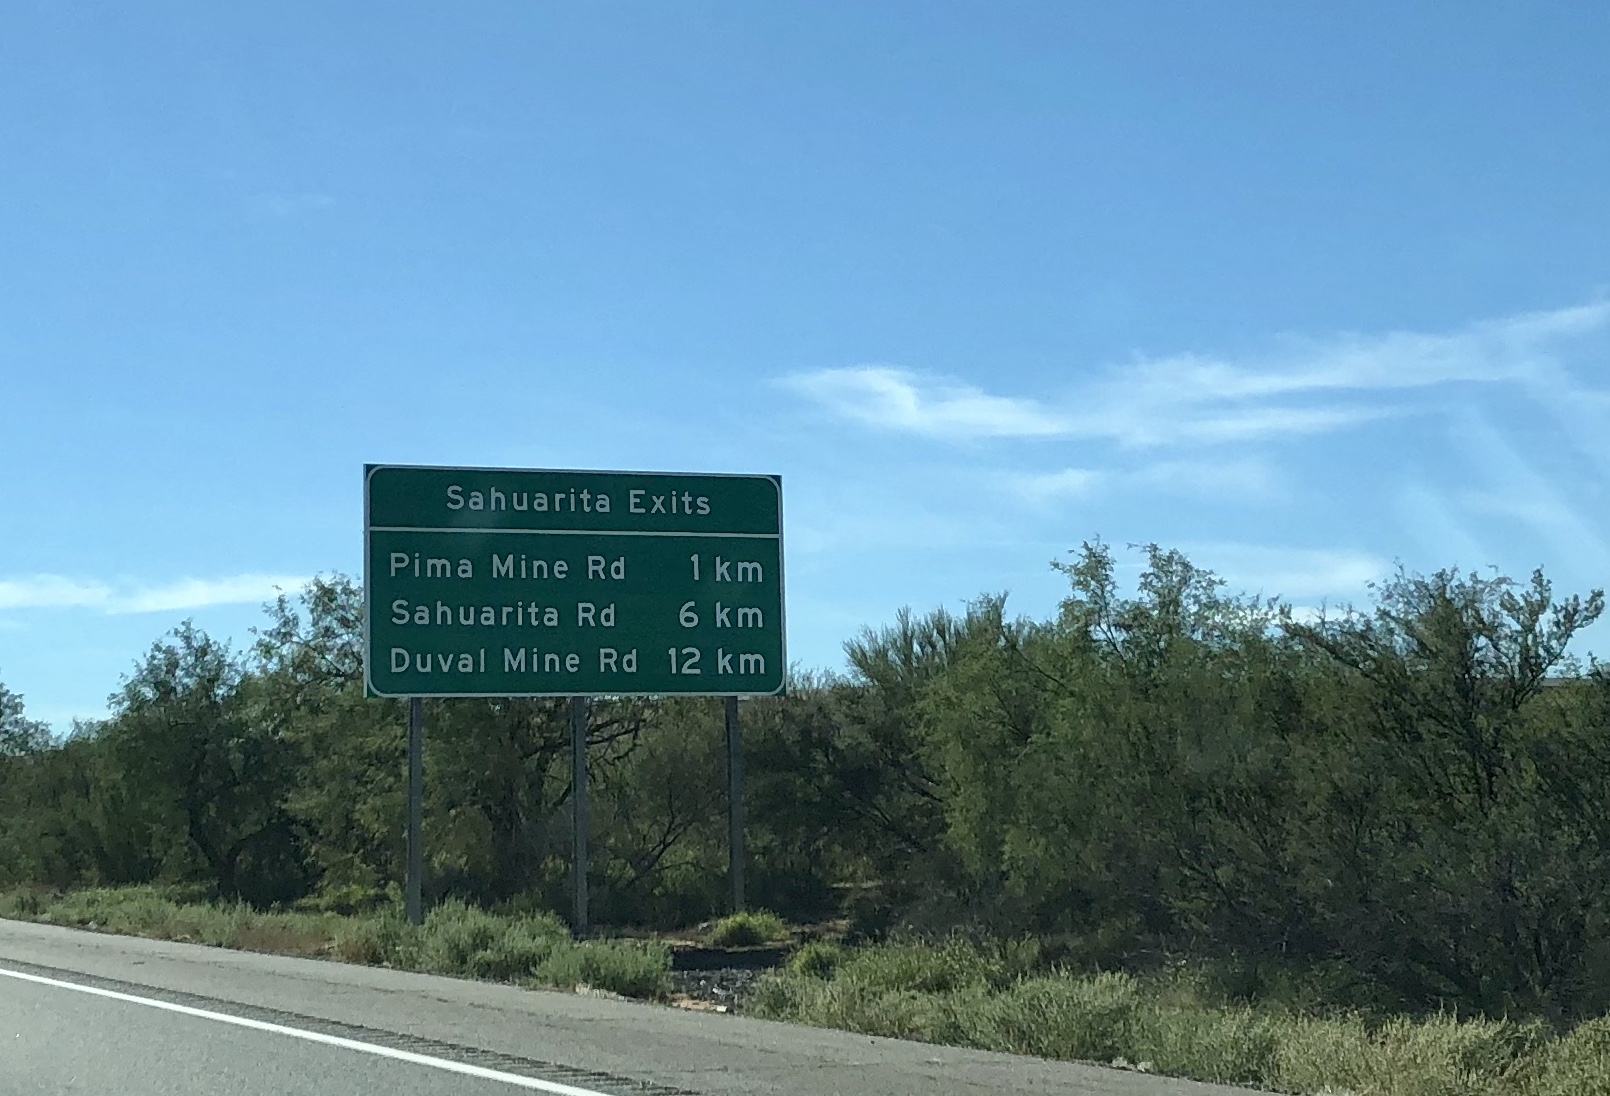 Sign with km instead of mi